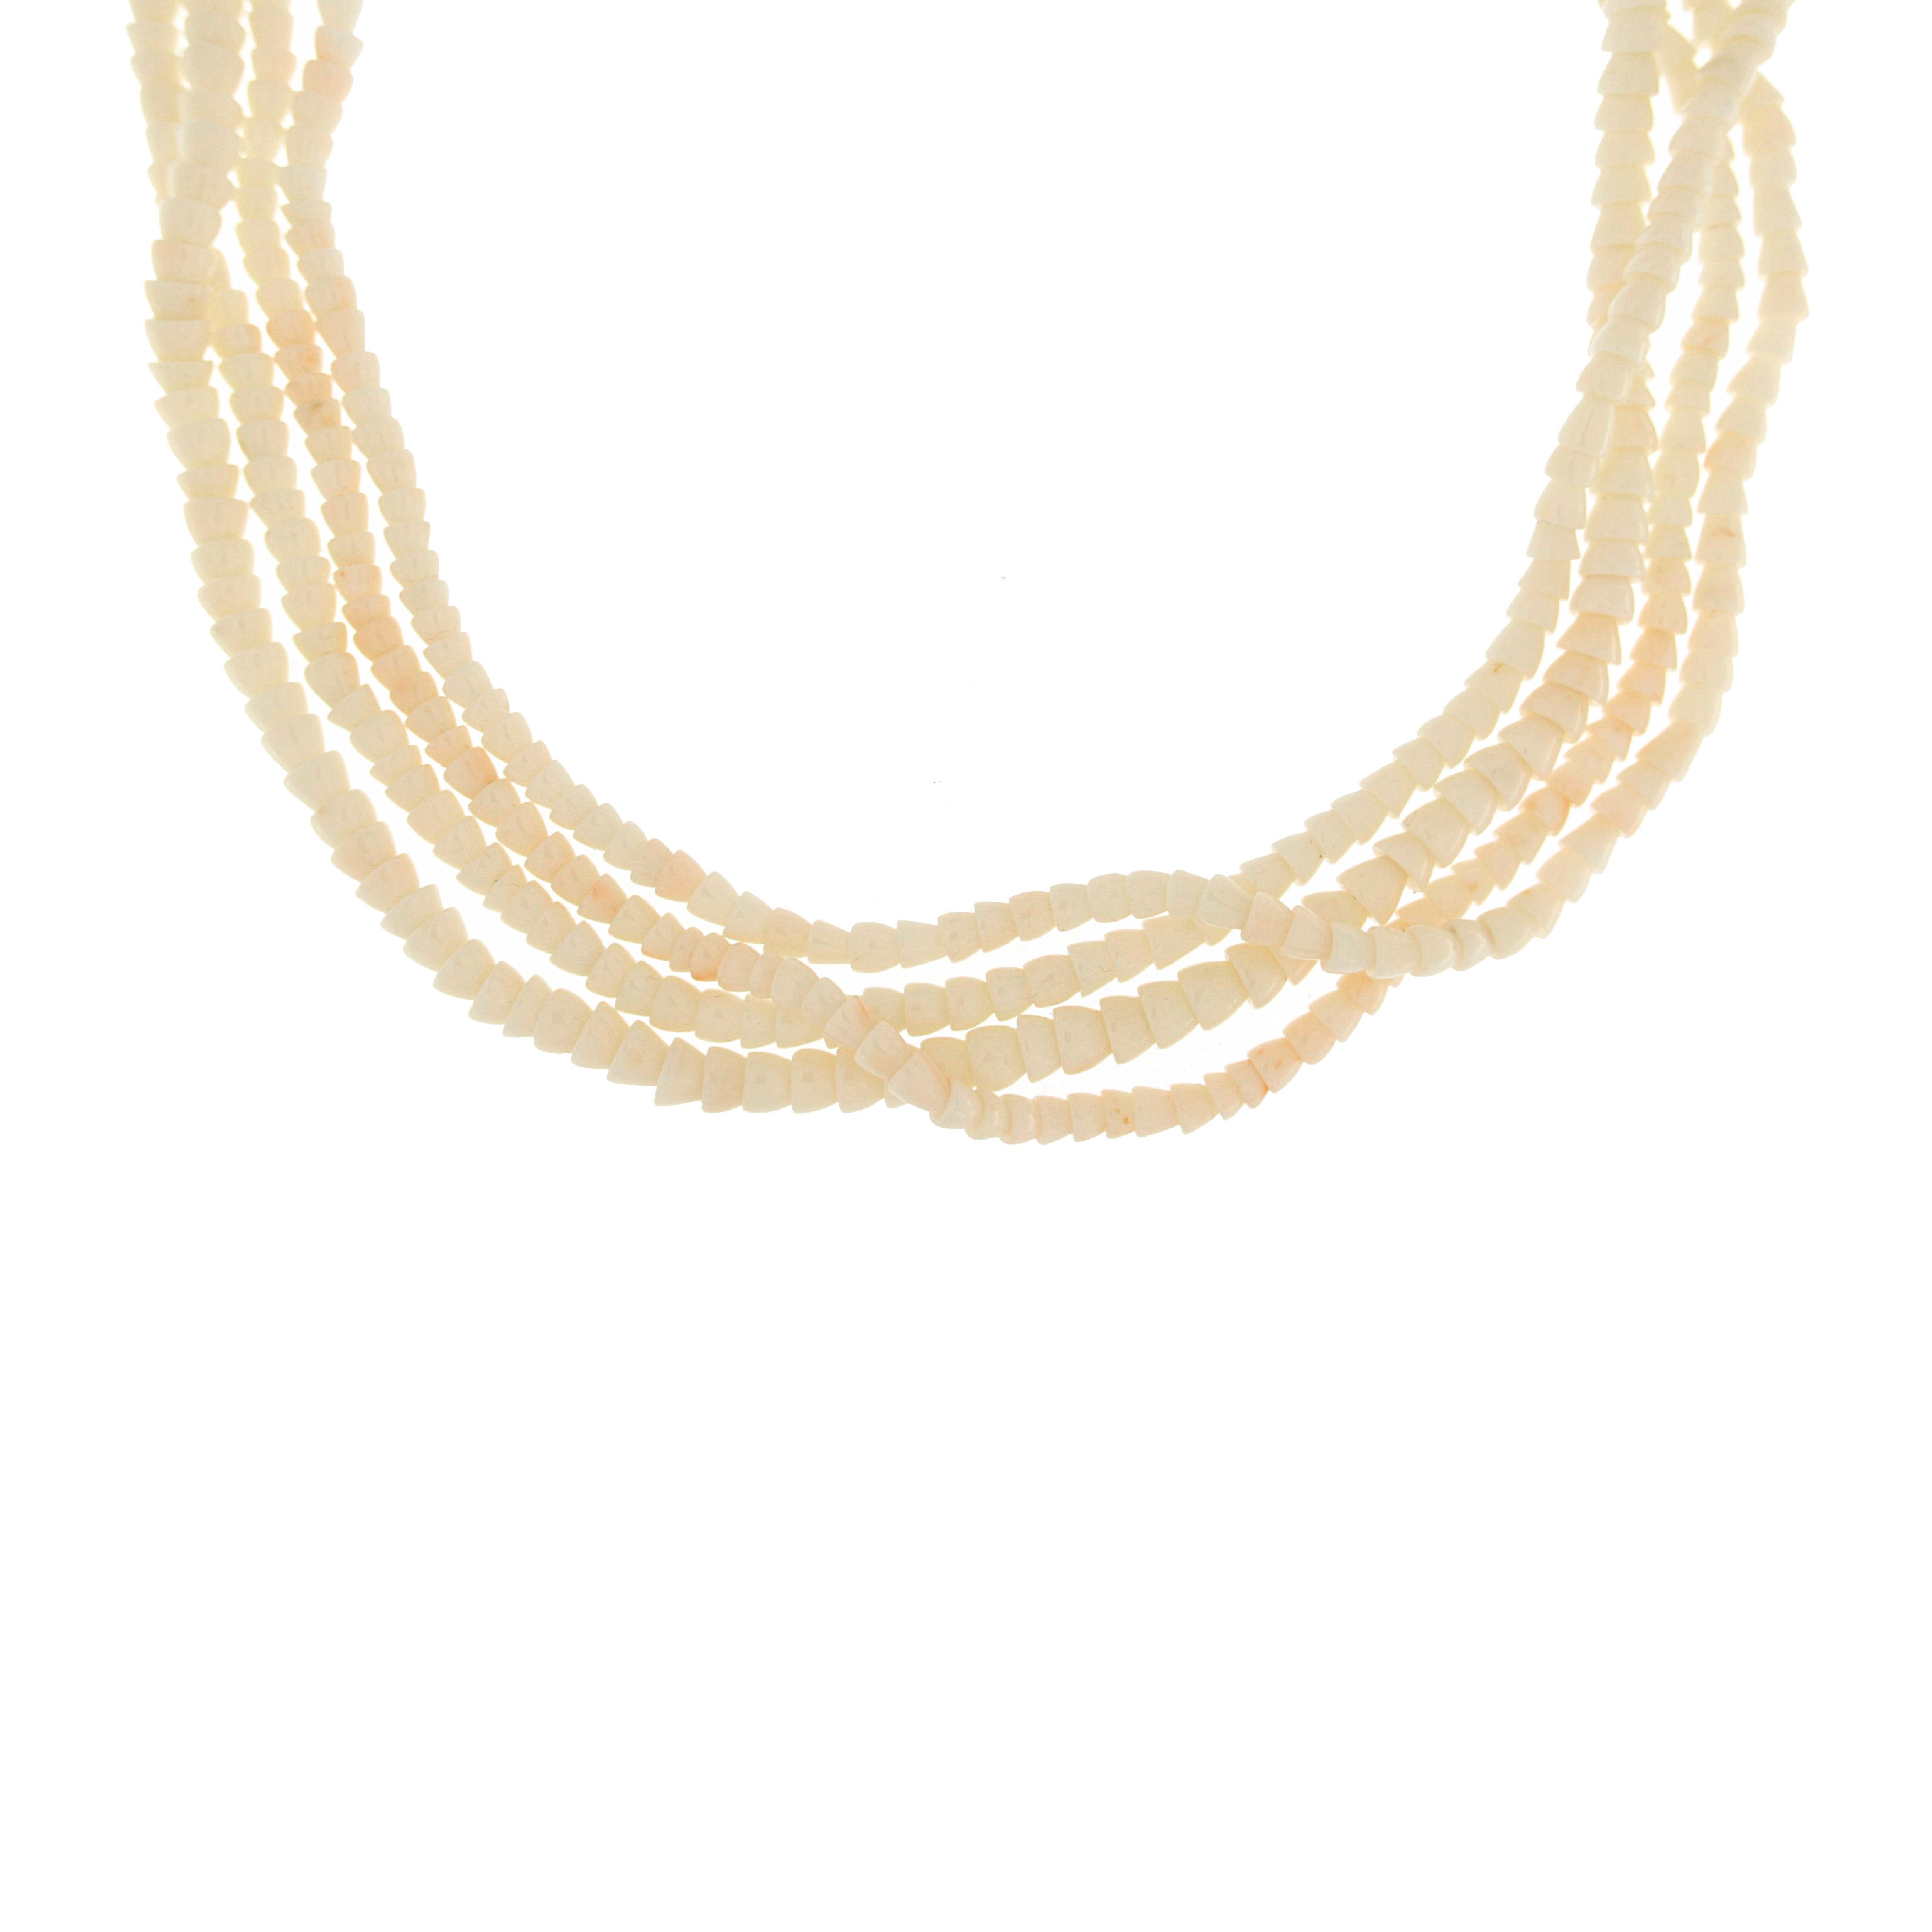 Modern Valentin Magro Four-Strand White Coral Cone Necklace